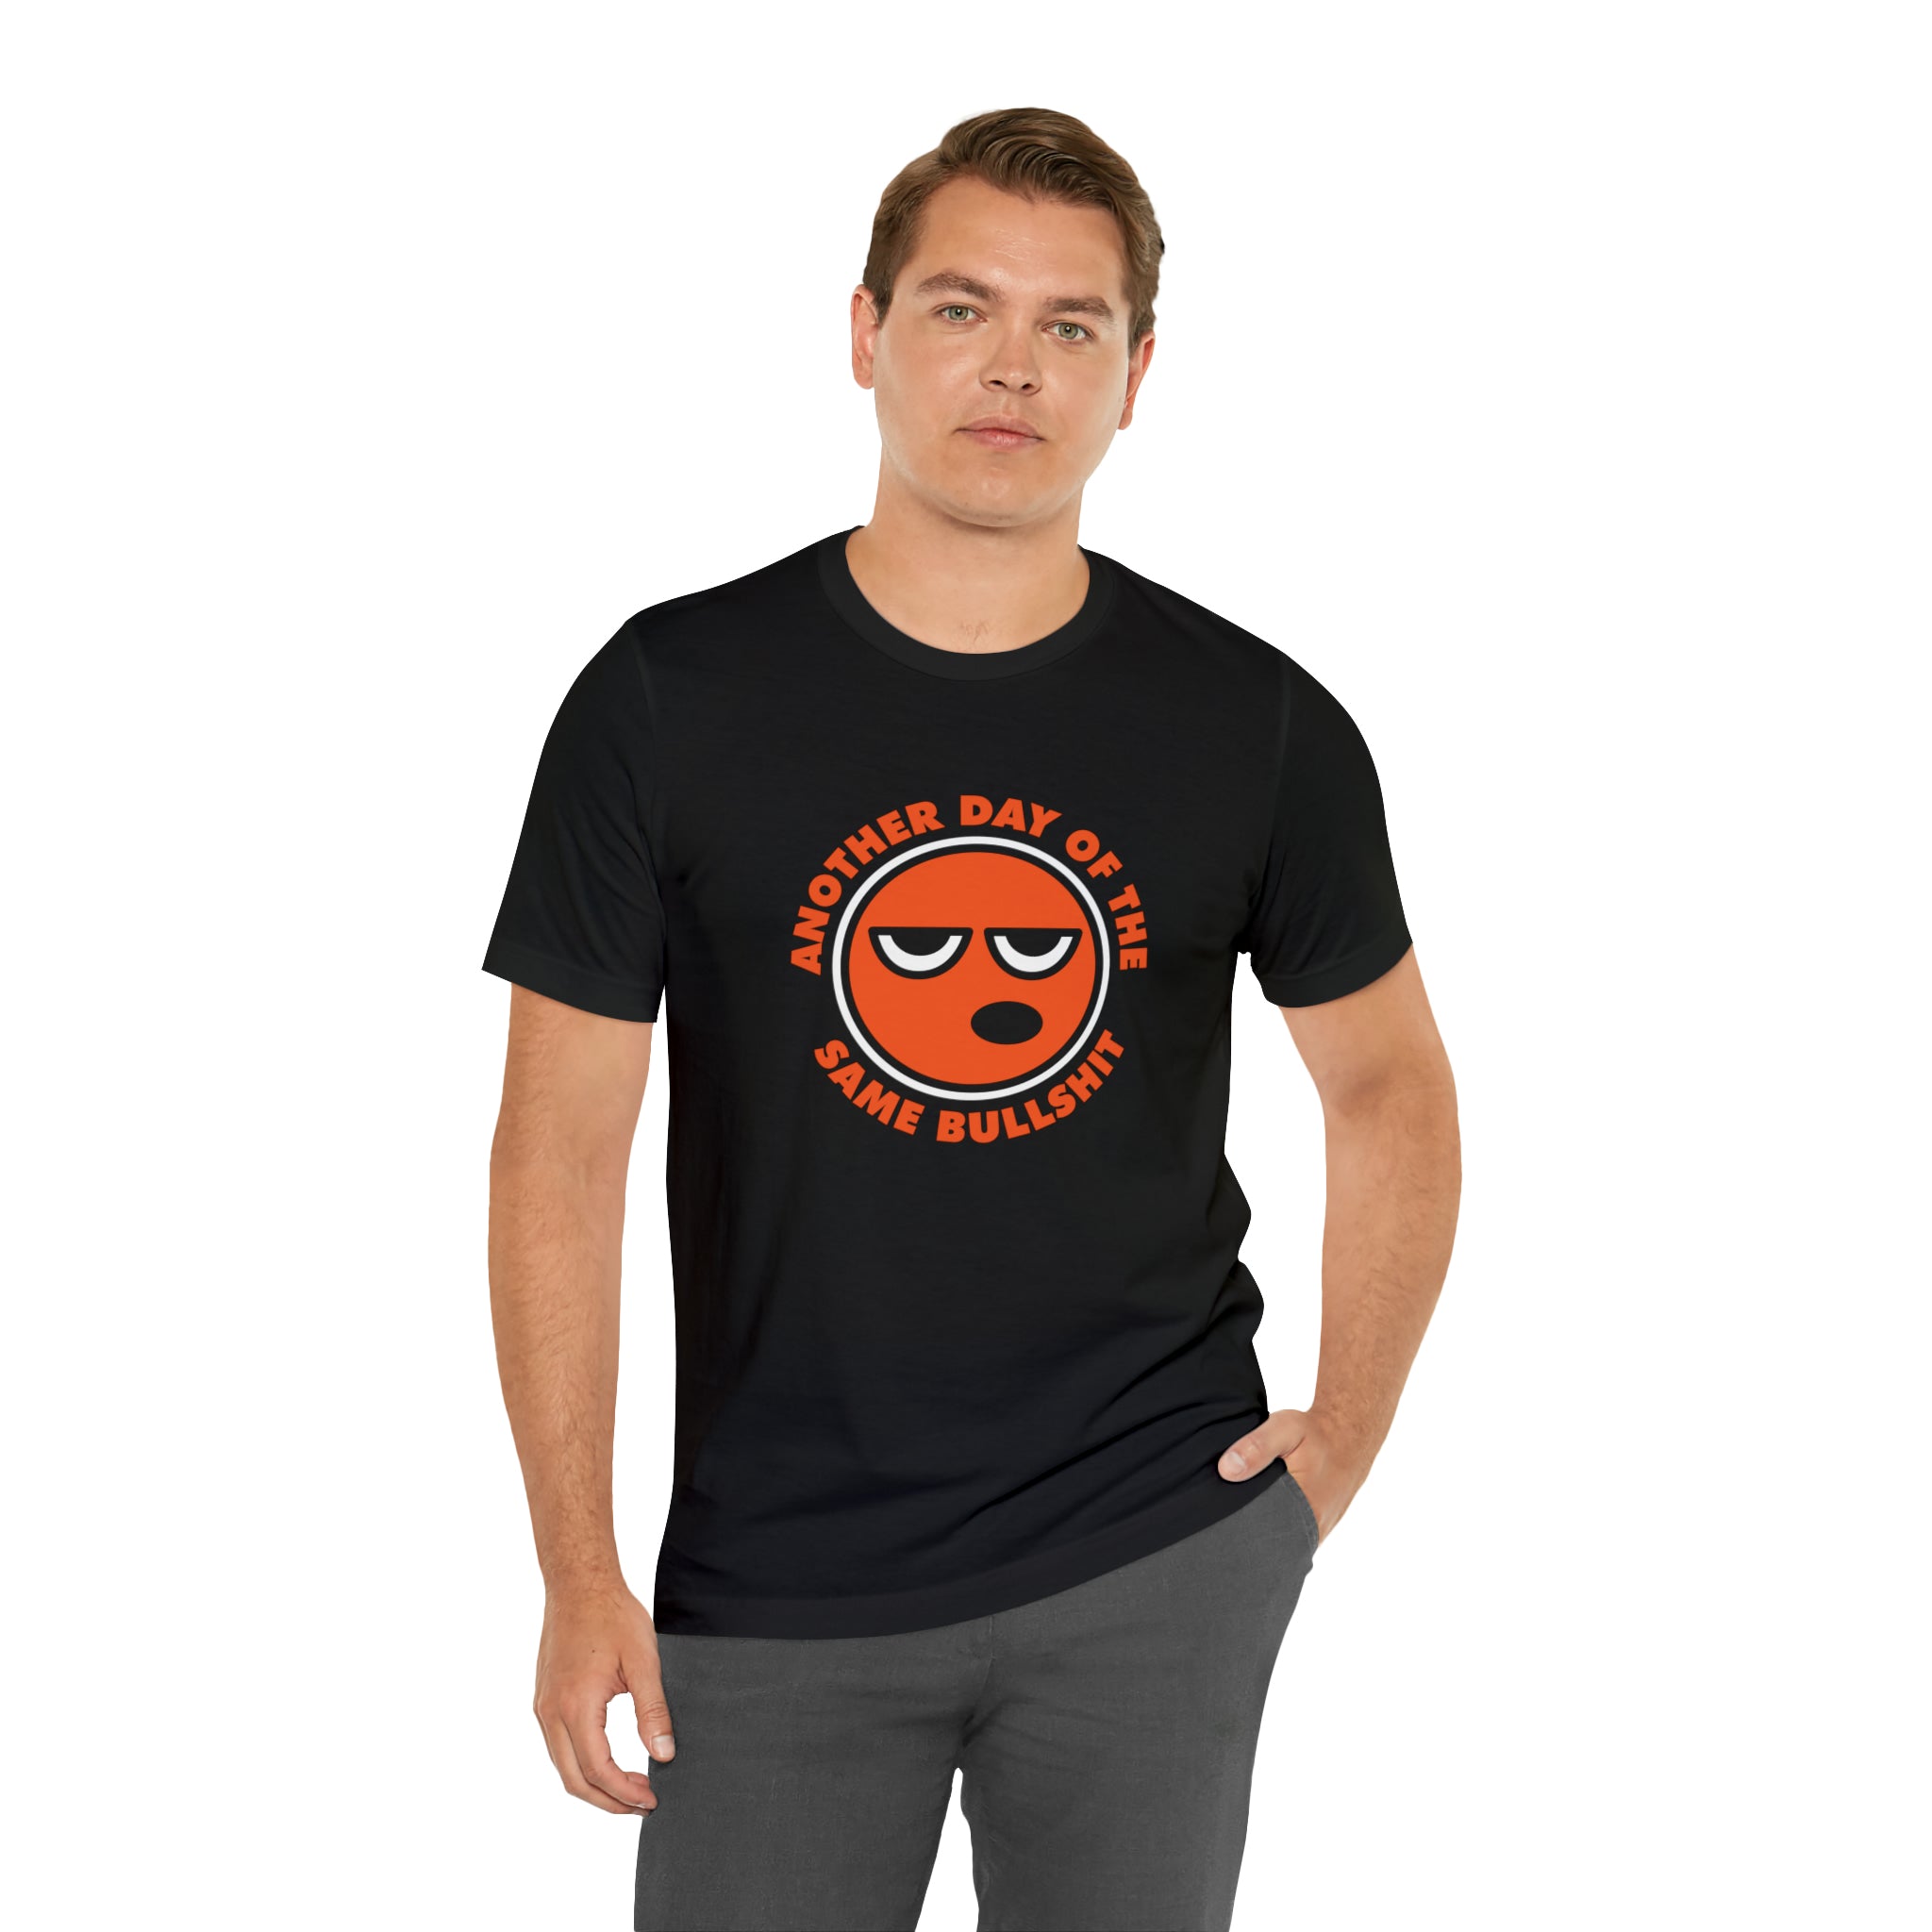 A man wearing a Another Day of the Same Bullshit T-shirt with an orange smiley face displaying a positive attitude.